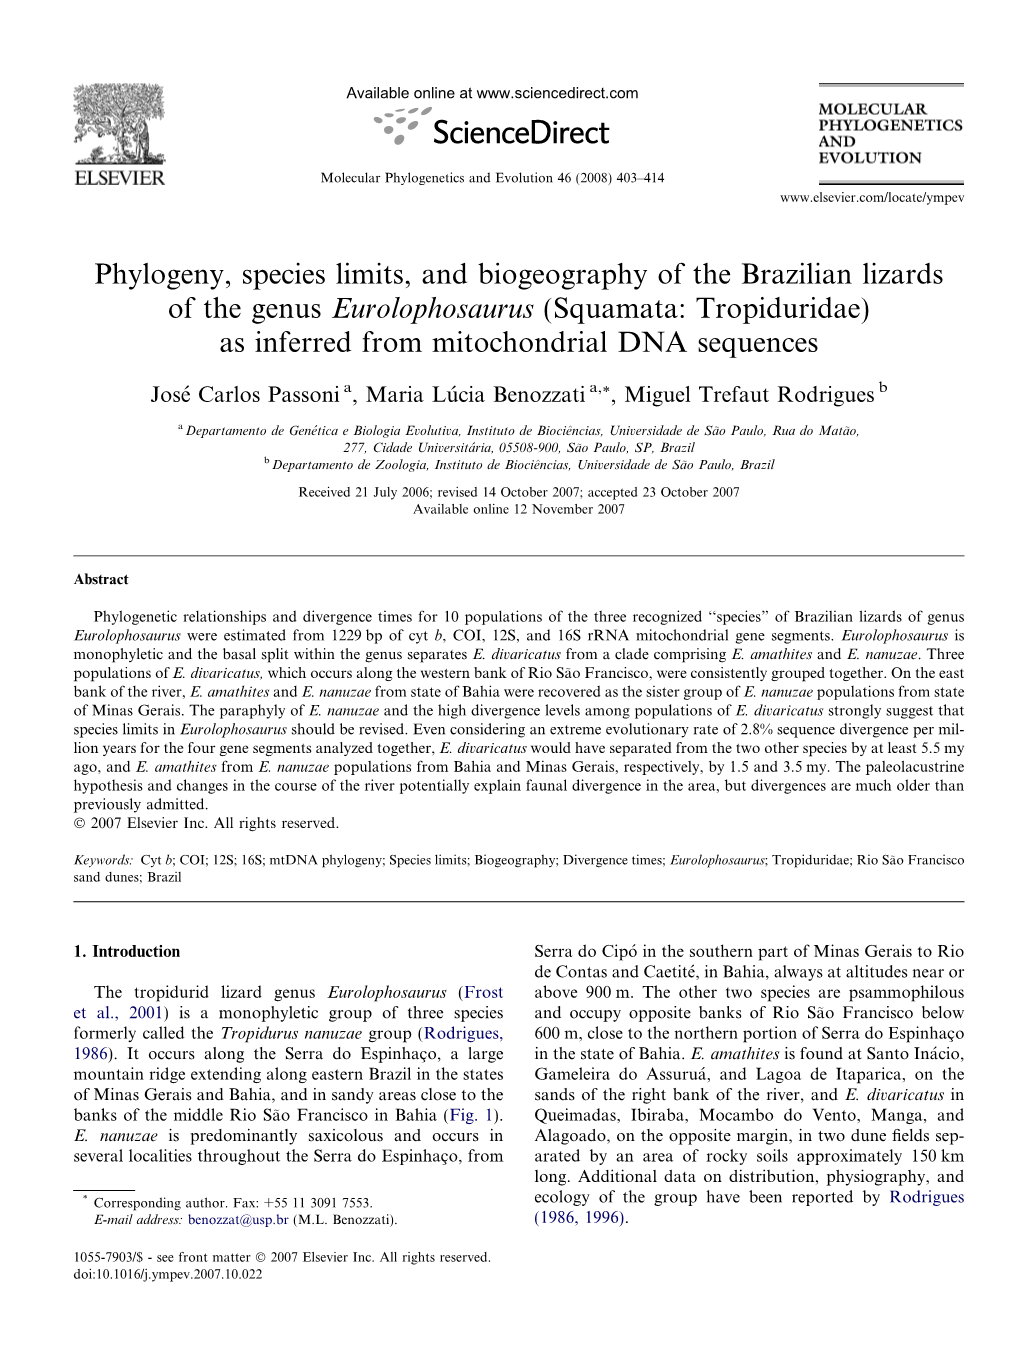 As Inferred from Mitochondrial DNA Sequences